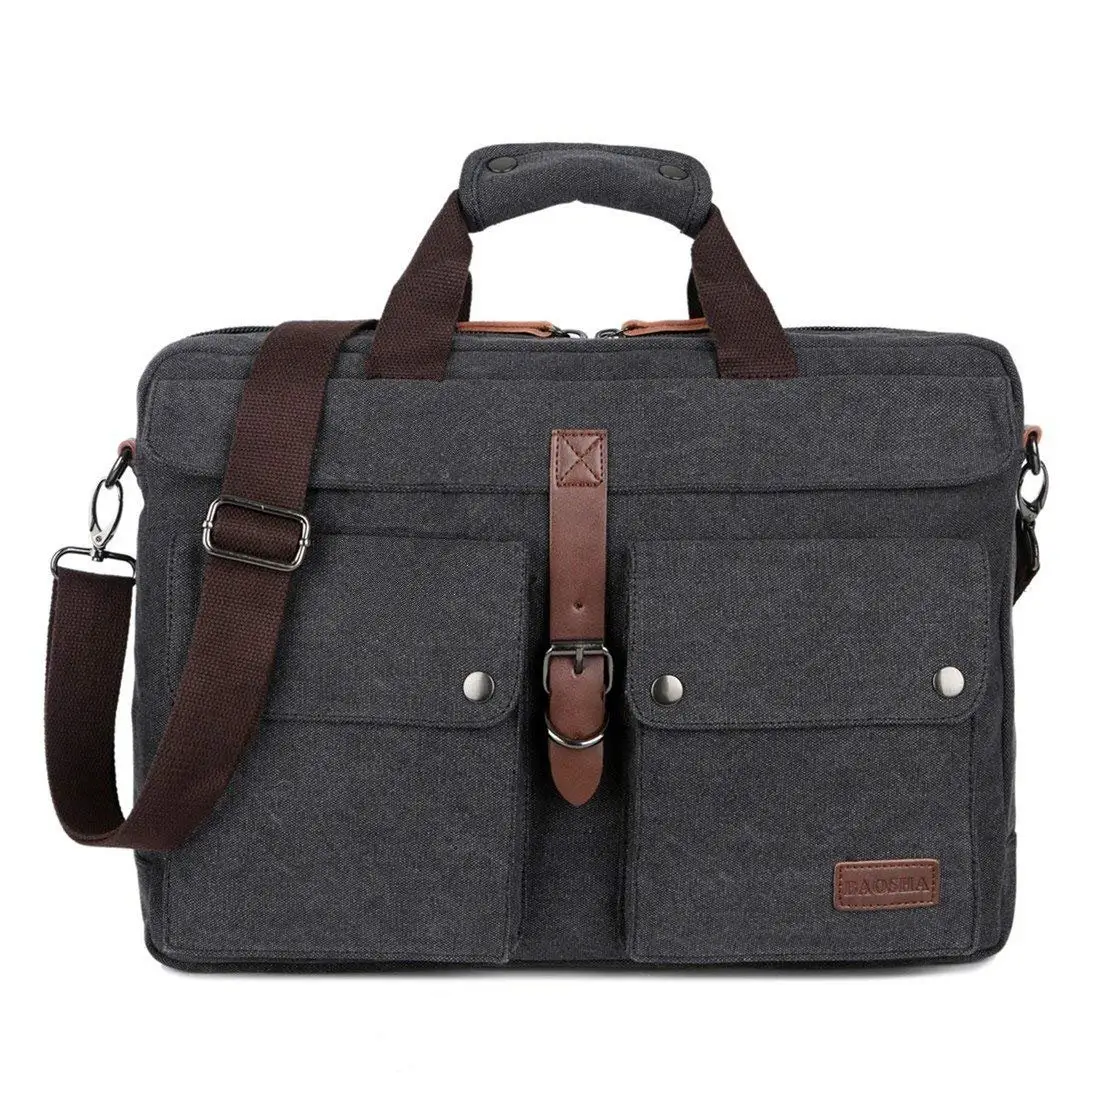 Waterproof leather computer Business Briefcase Document Bag For Men Laptop Bag